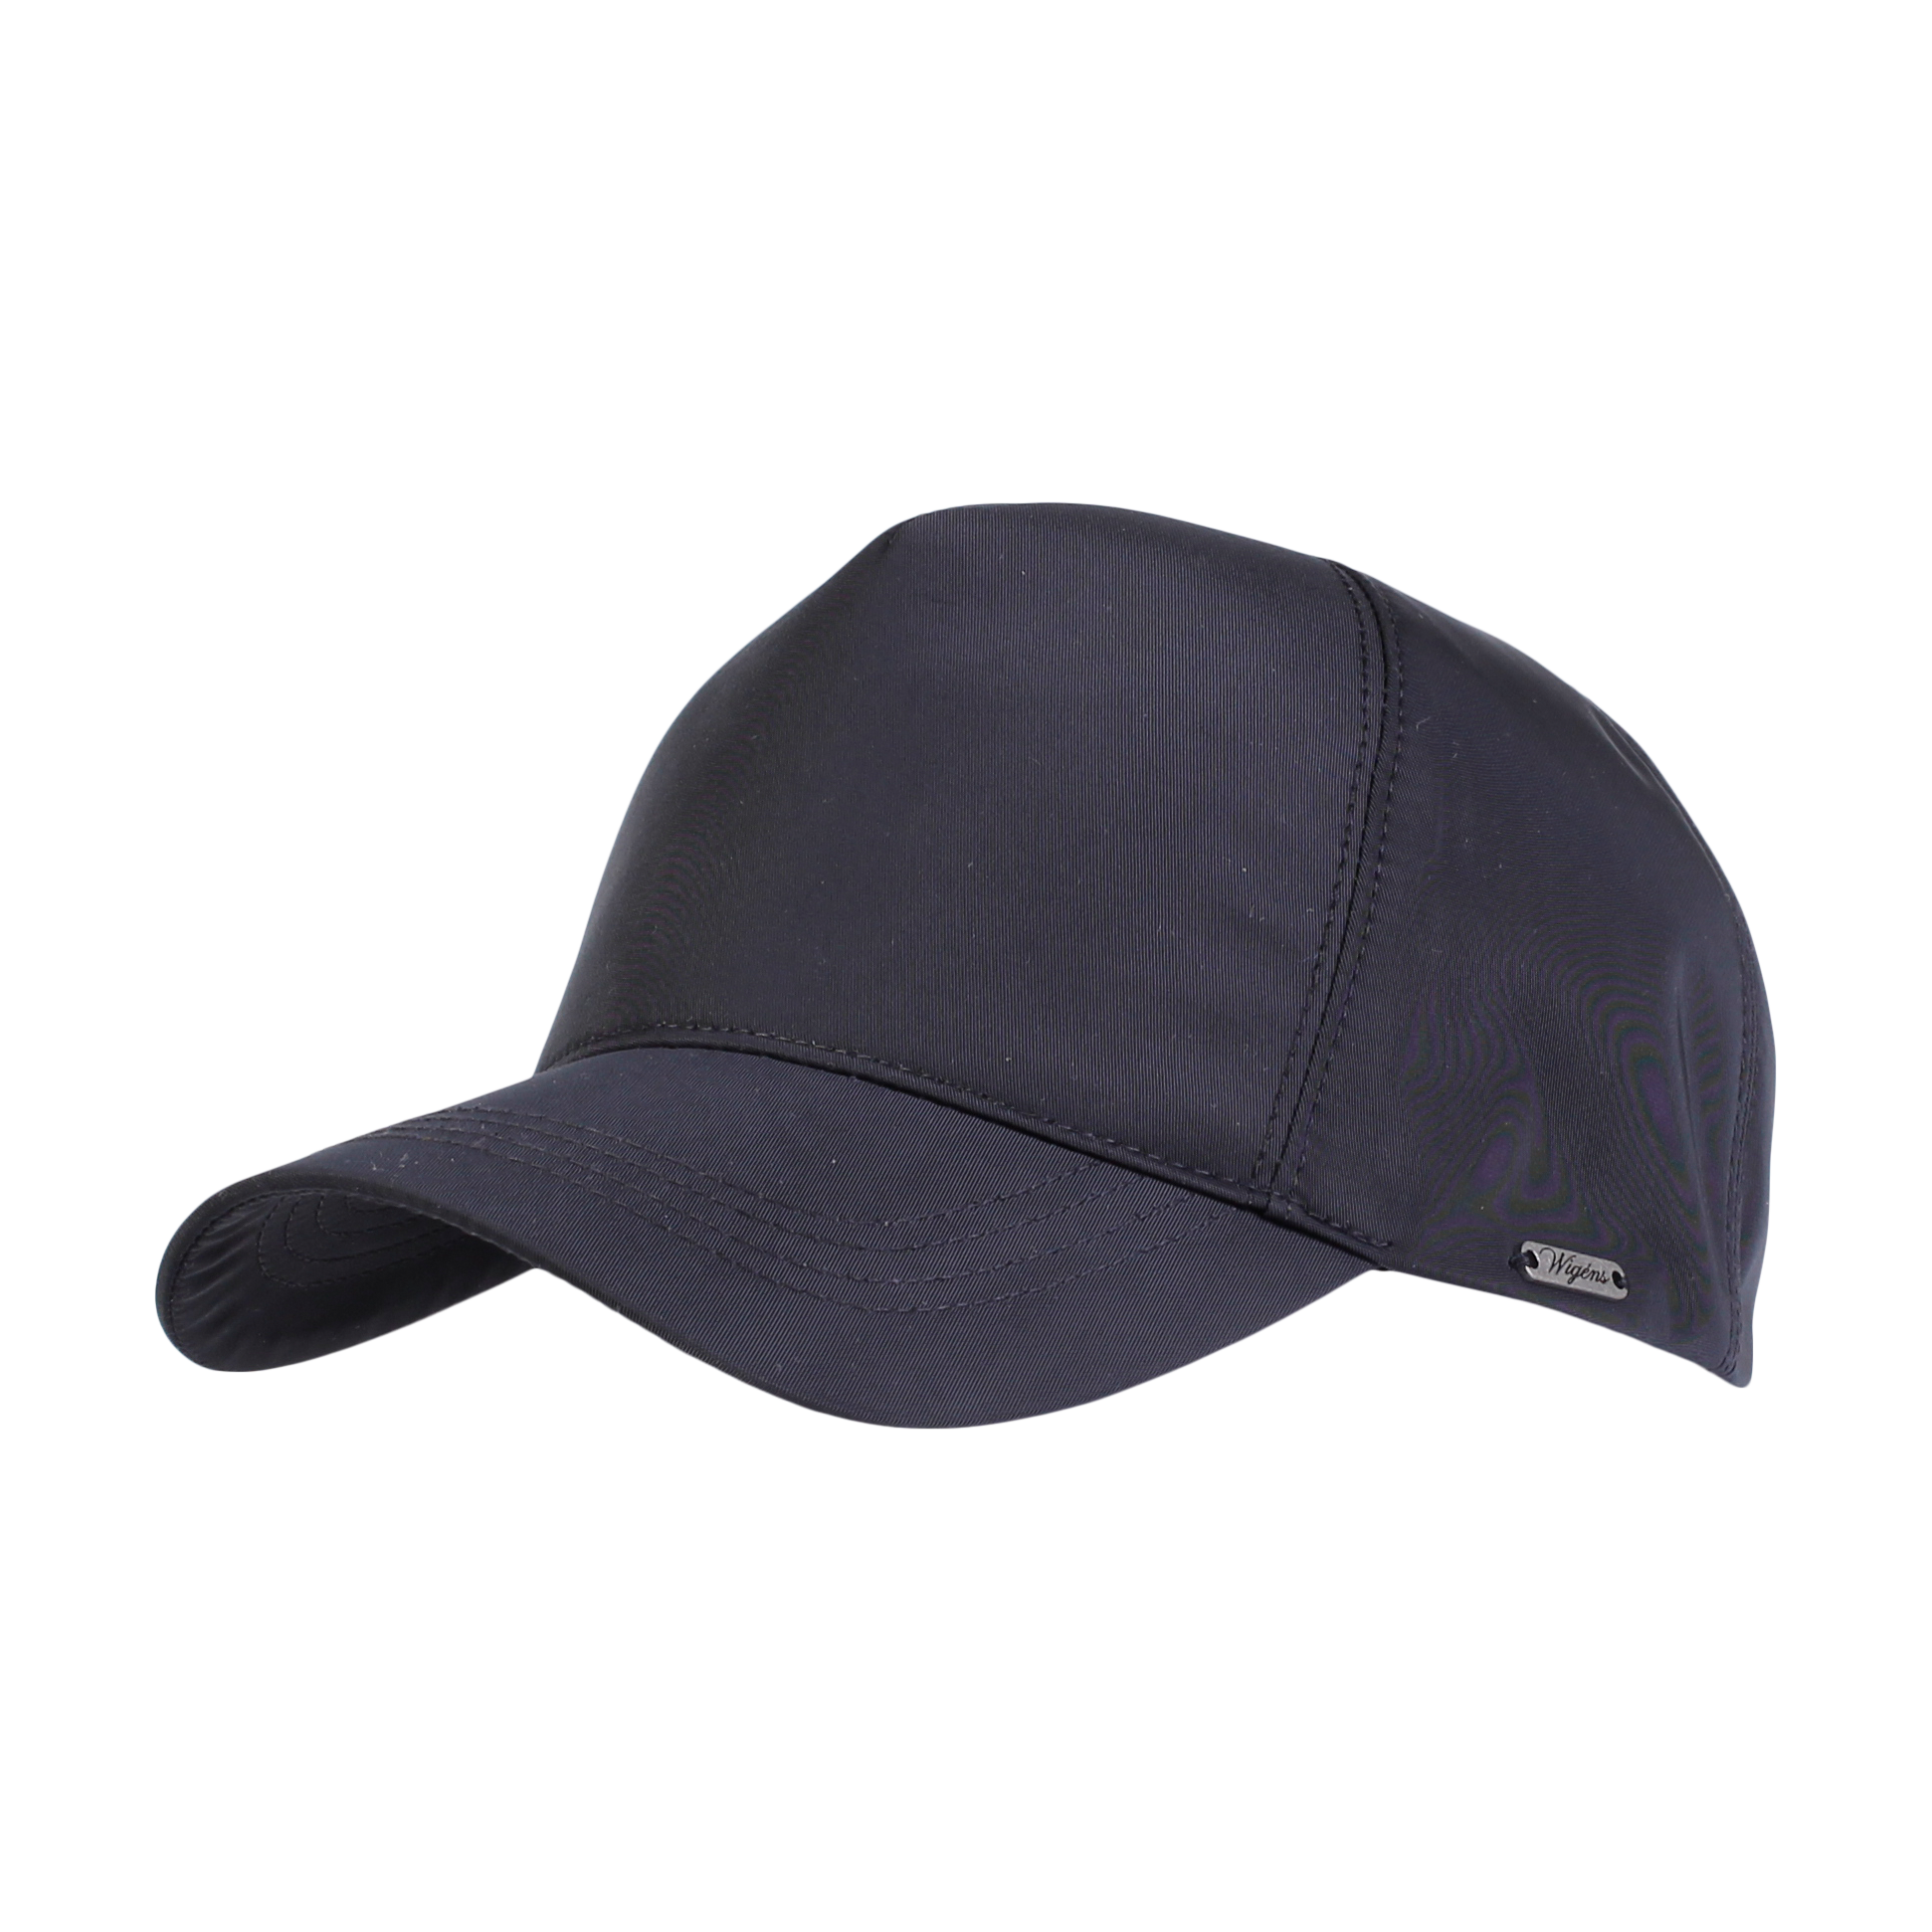 Baseball Contemporary Cap in Black Sport Twill (Size Large) by Wigens